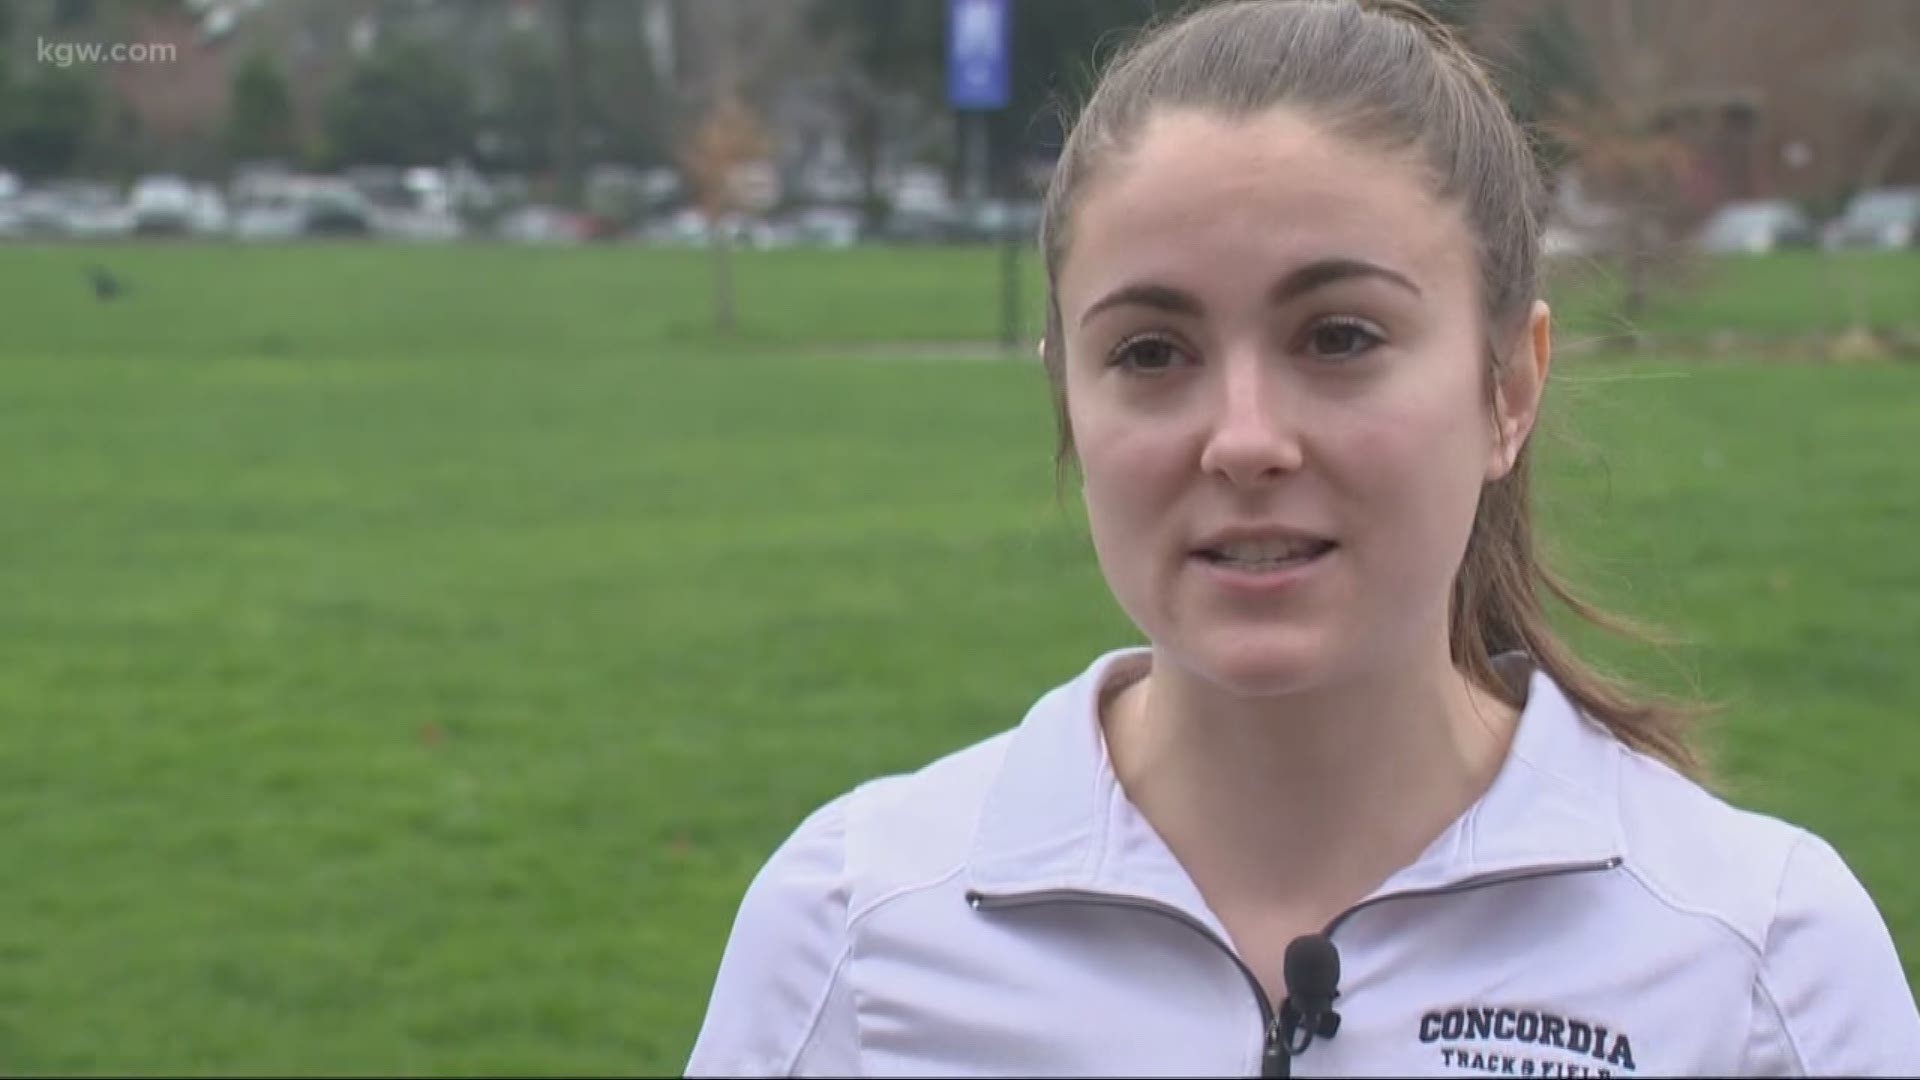 Students and staff are still reeling from the Corcordia University closure. Devon Haskins explains how student athletes are affected.